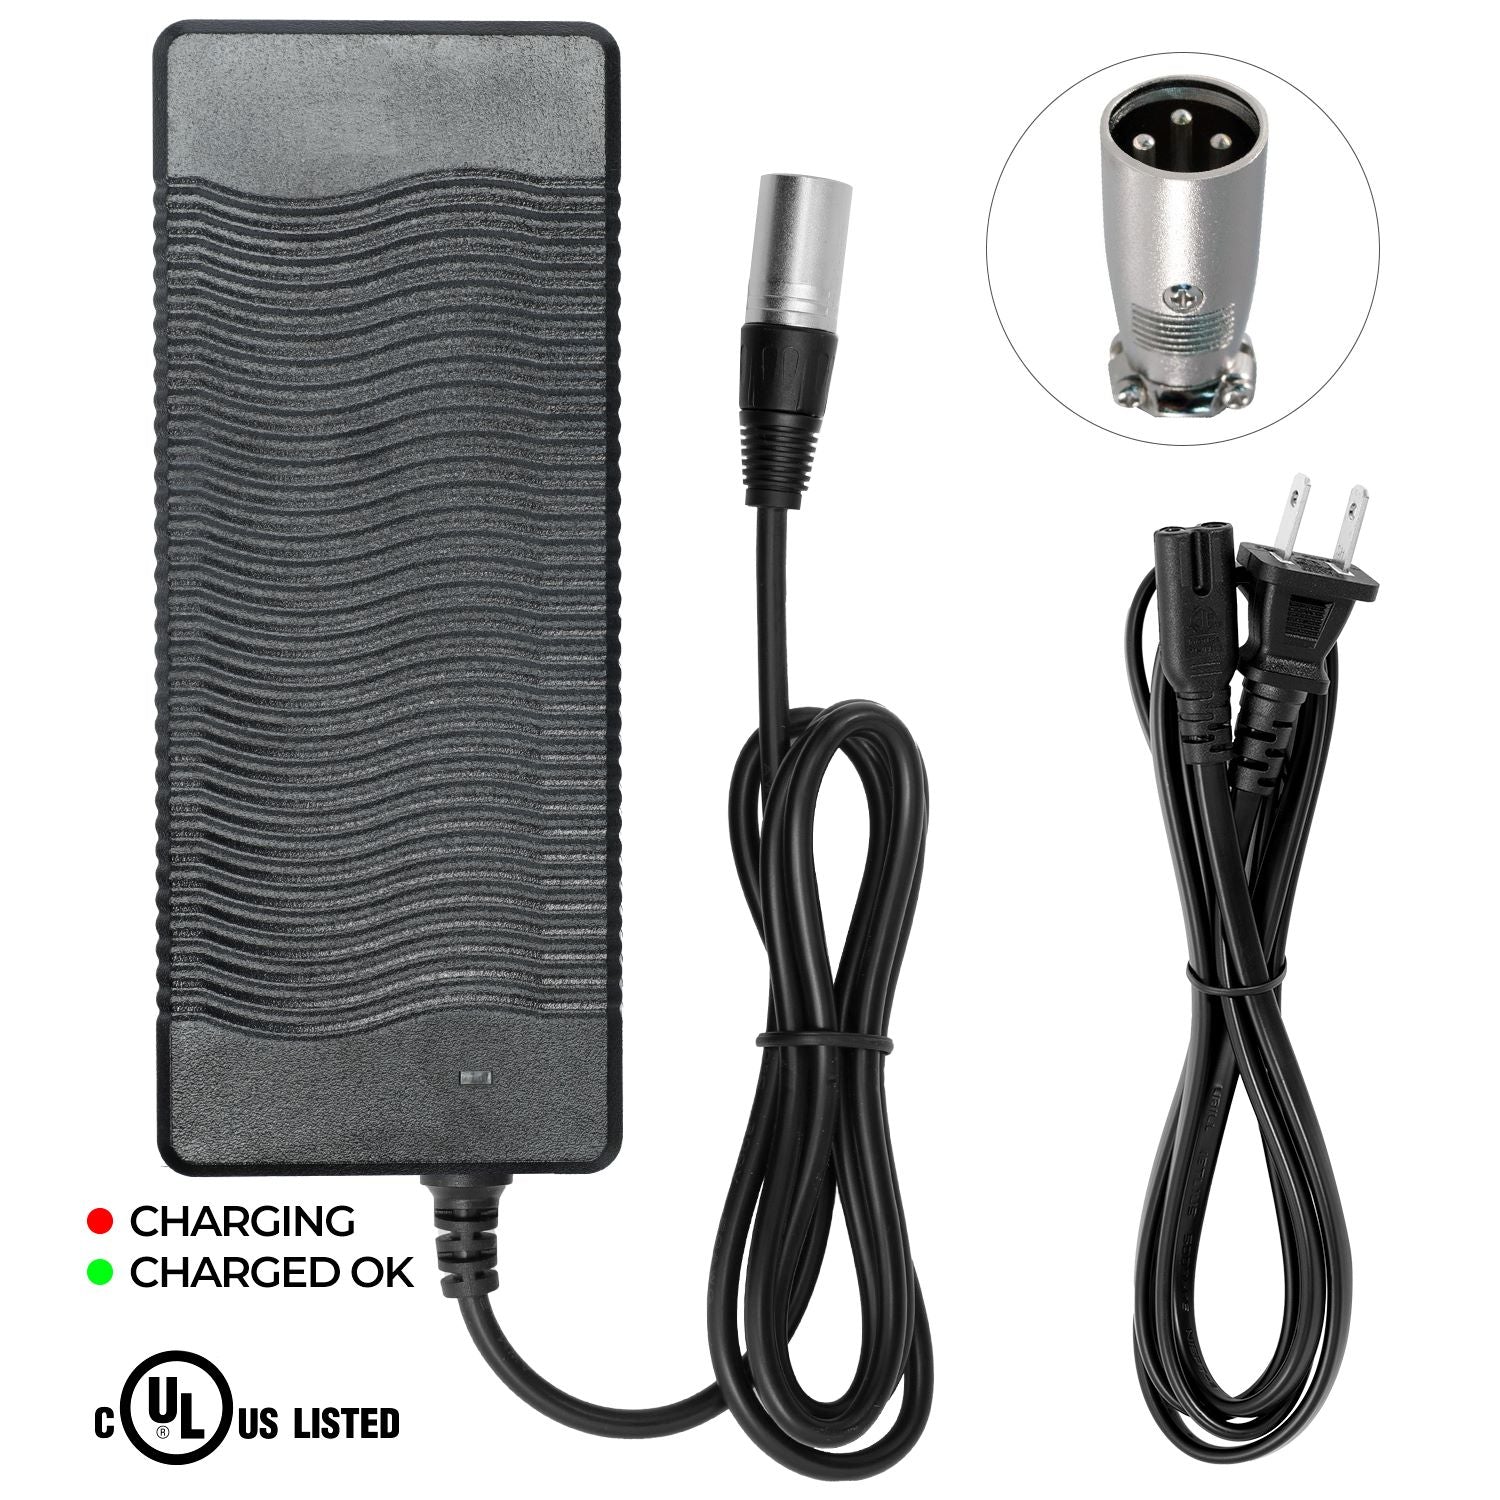 UL Listed Charger for Pedego Comfort Cruiser II eBike (NOT for Other Pedego Models,Please Check the DC Shape Carefully)